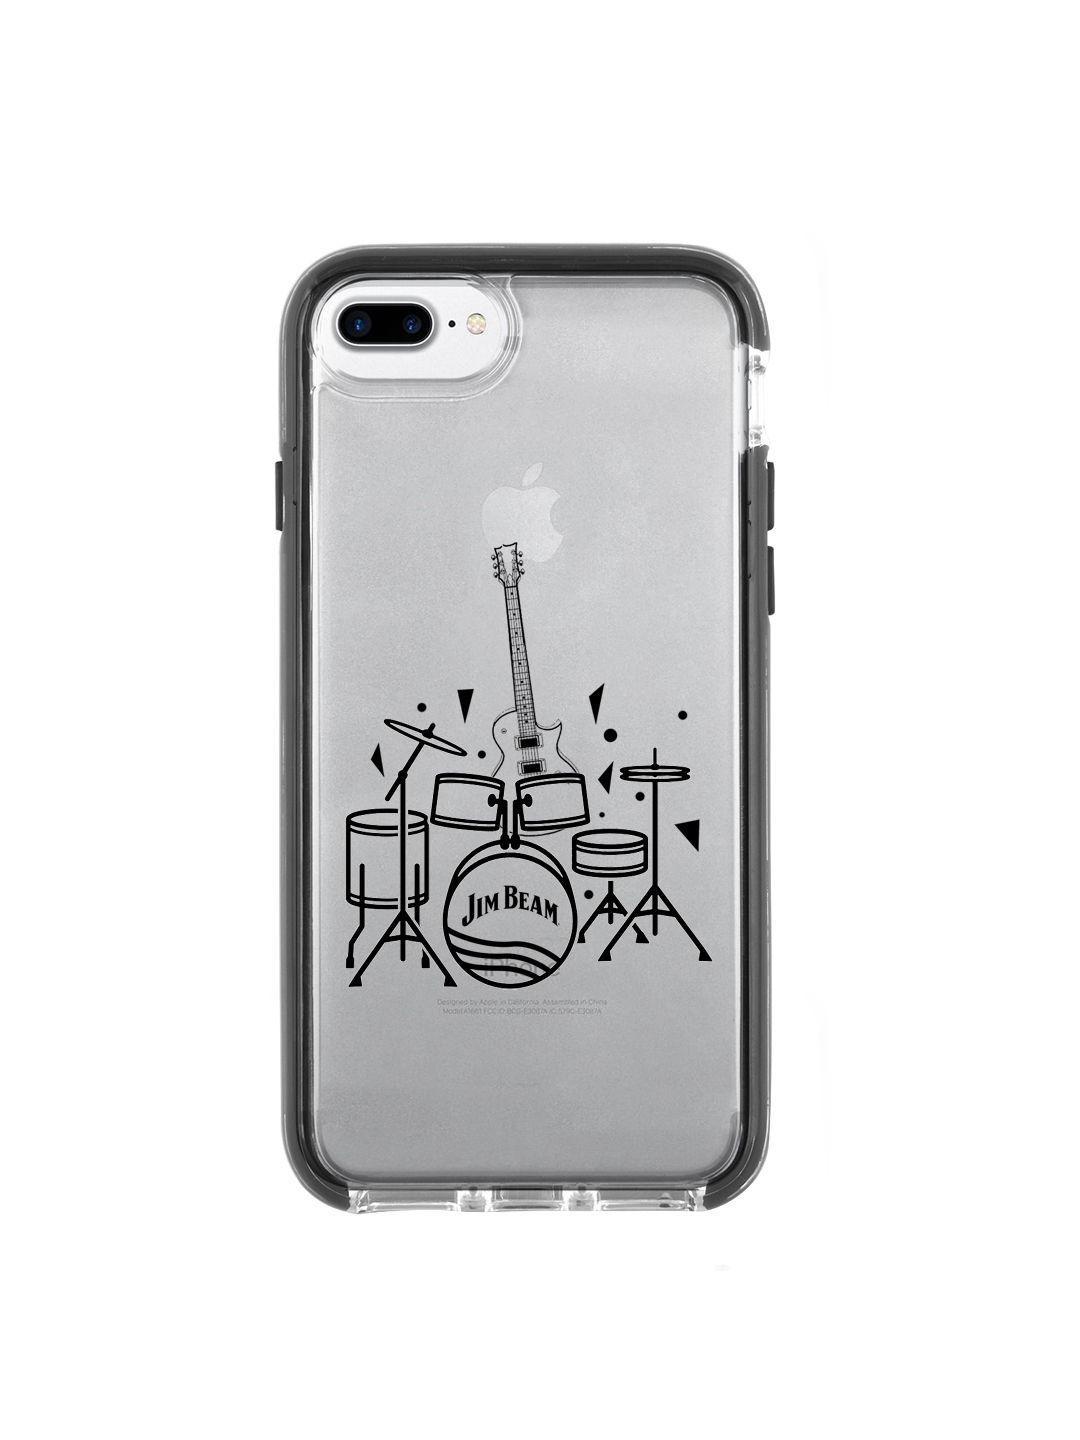 Jim Beam The Band - Shield Case for iPhone 6S Plus